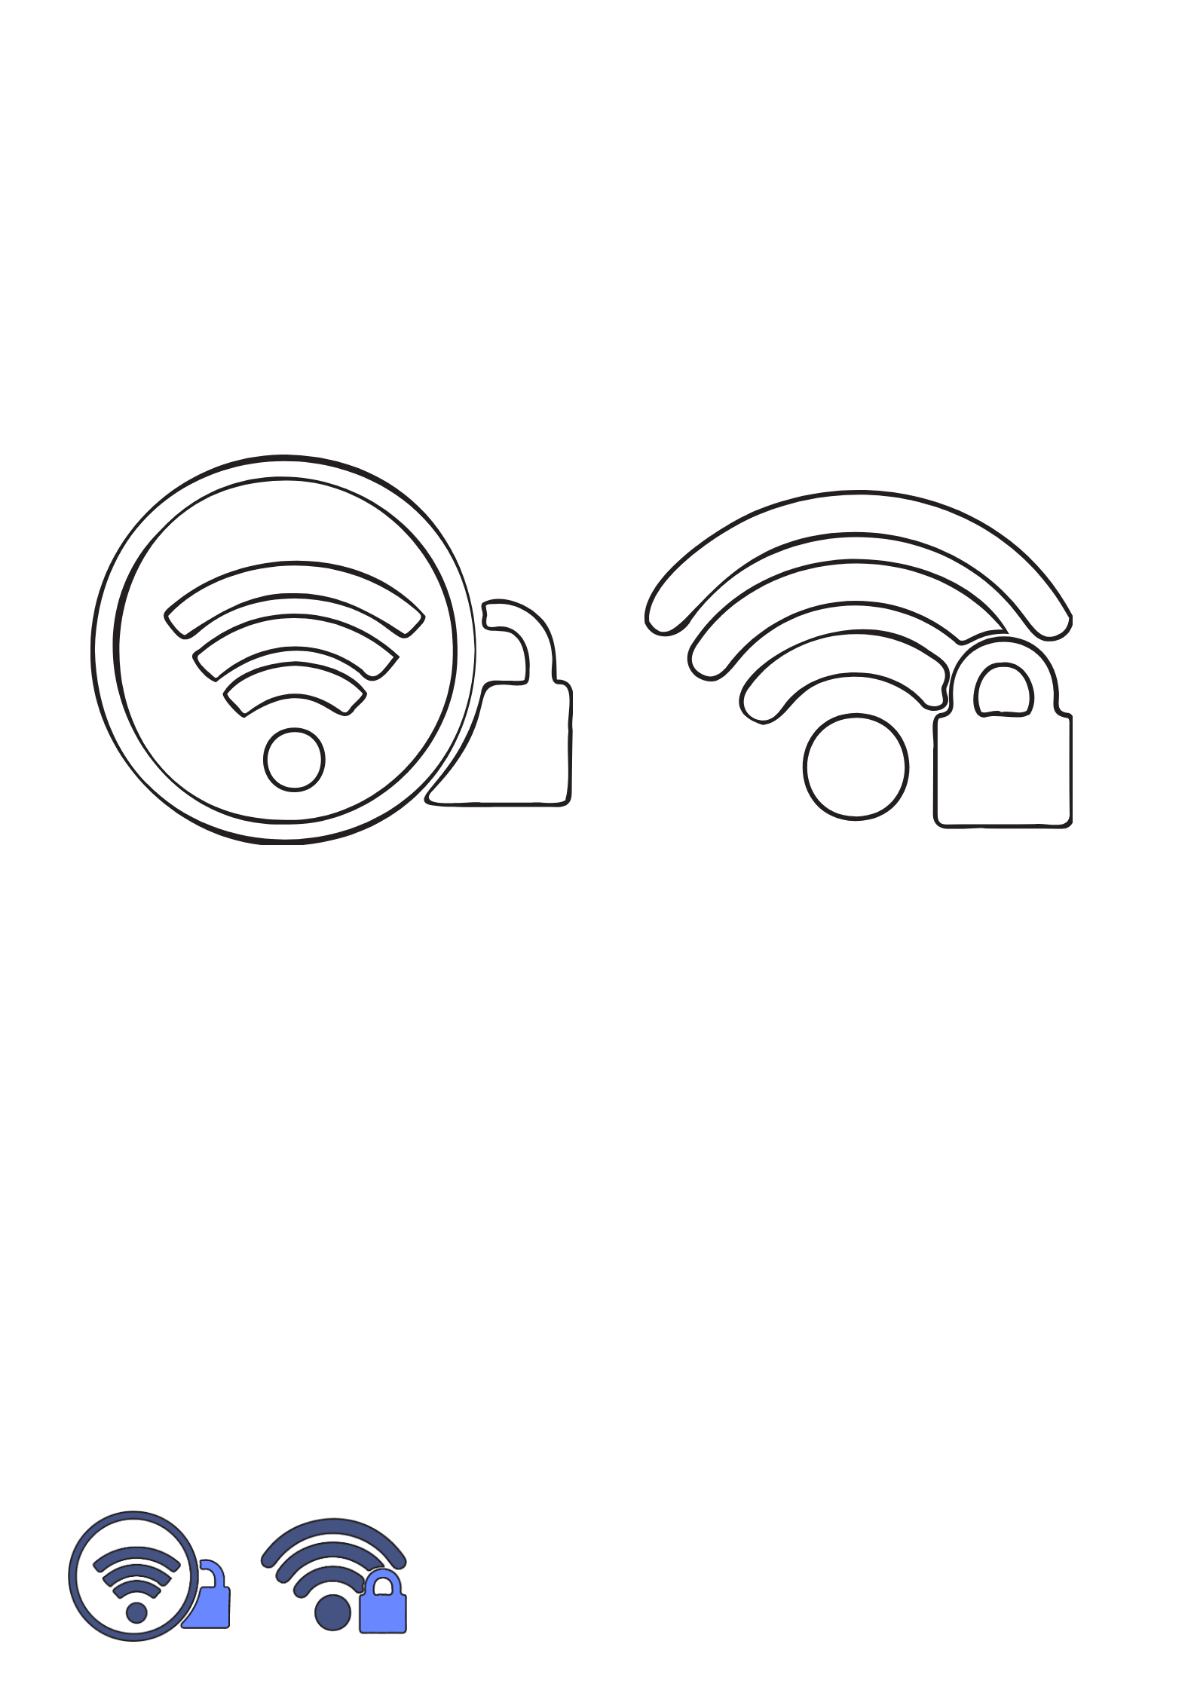 Secure Wifi coloring page Template